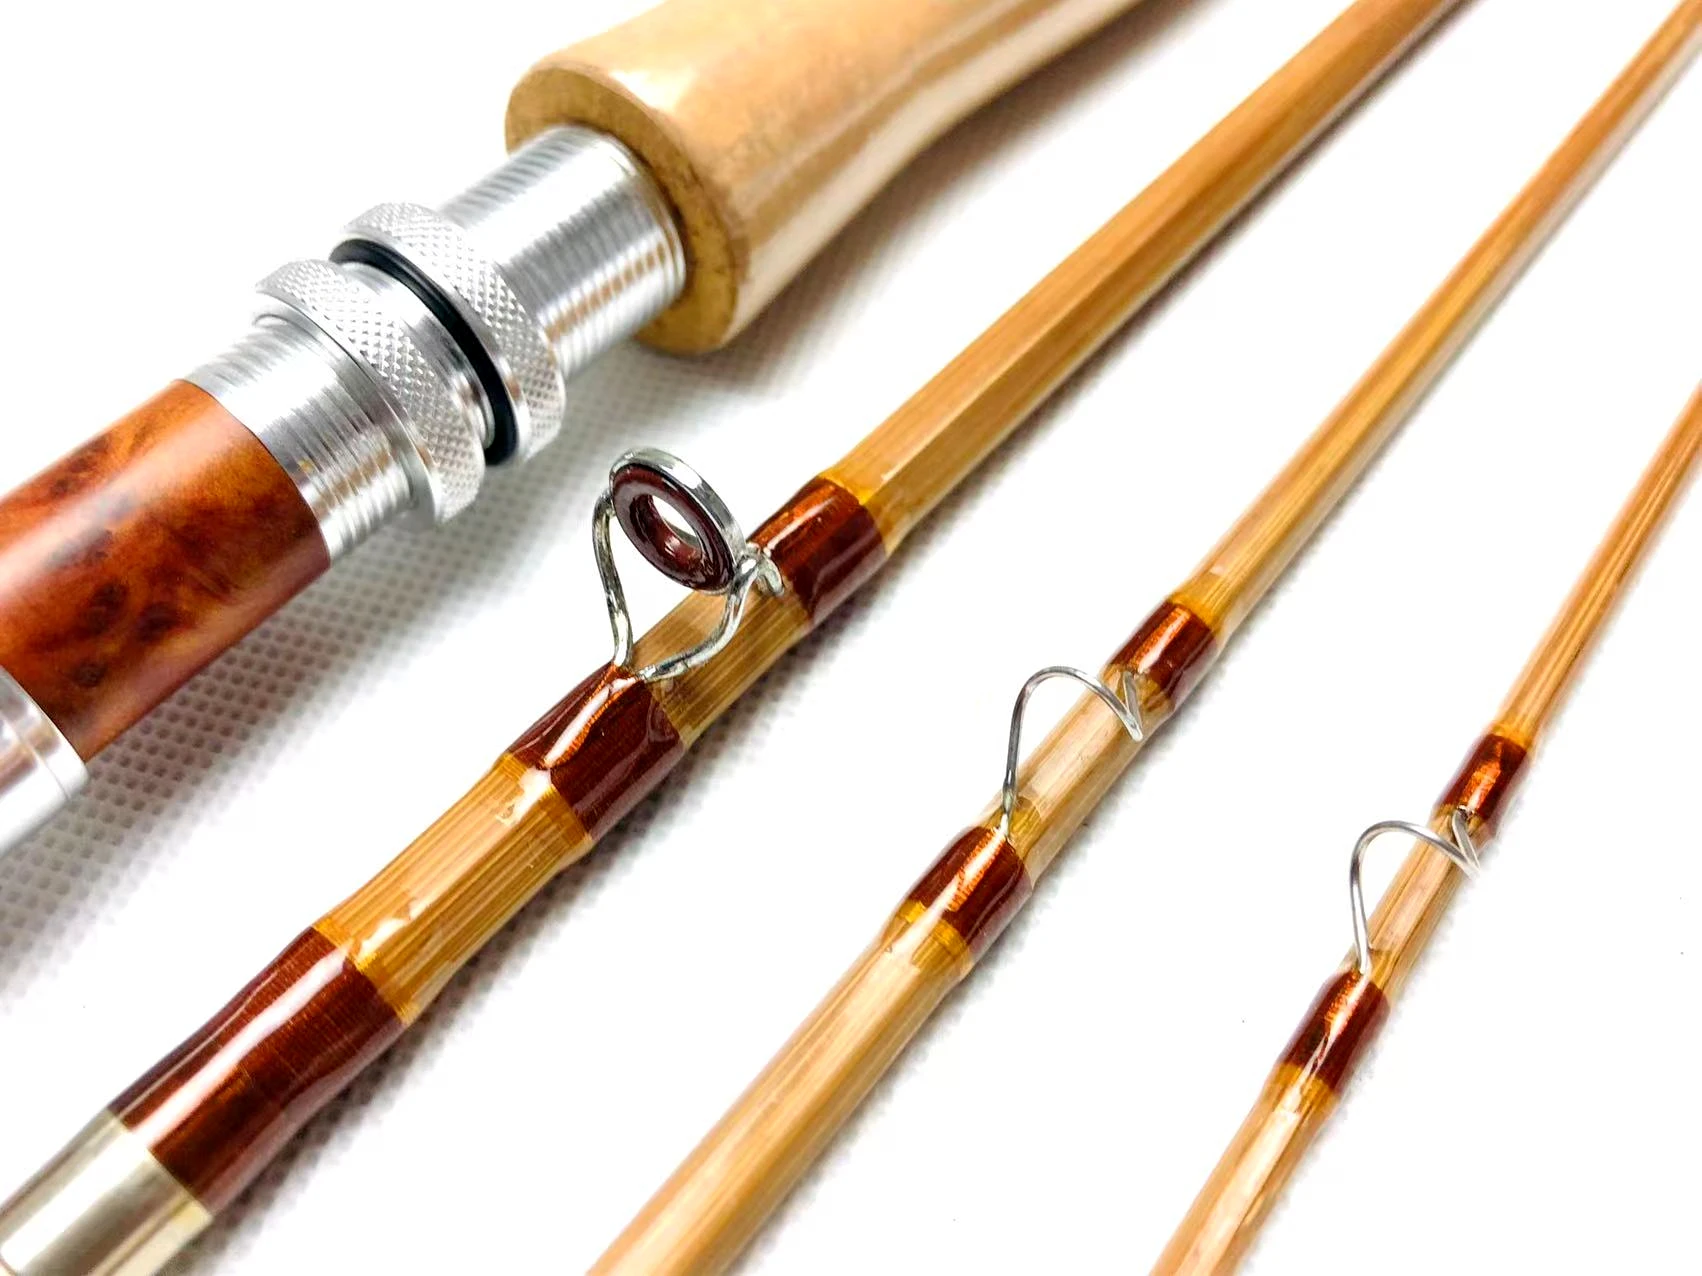 ZHUSRODS Classical Bamboo Fly Rods (7'6- 8'6) 3 piece ~ 2 tip